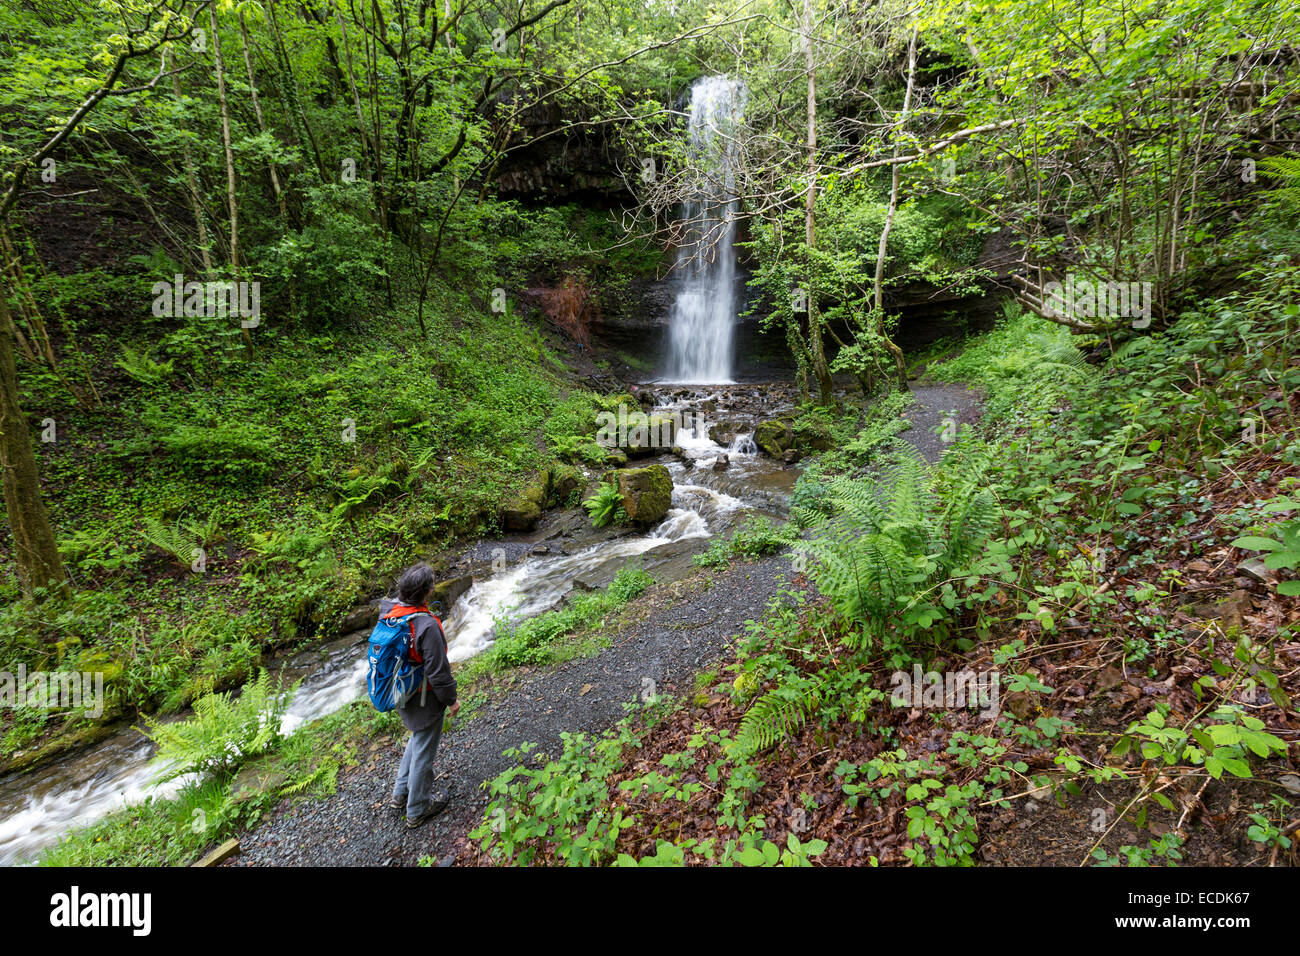 Waterfall and walker, Clydach Gorge, Wales, UK Stock Photo